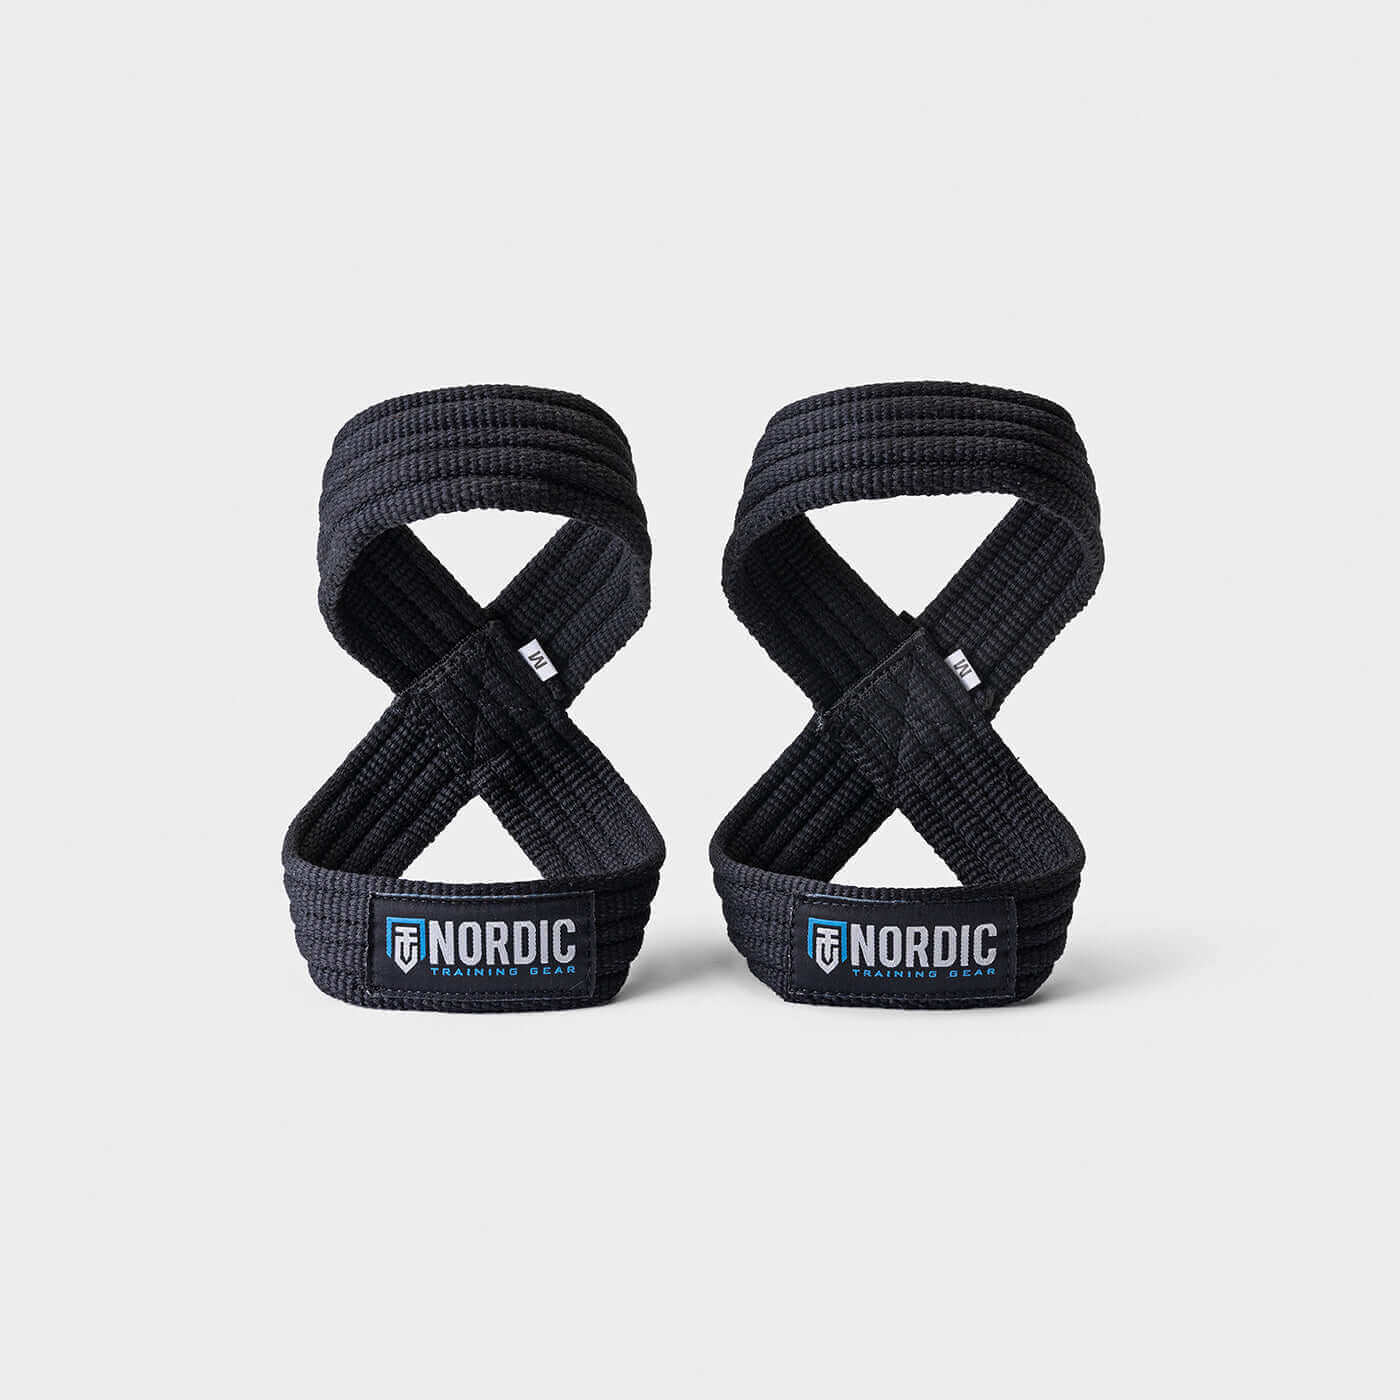 Lifting Straps, Wrist Straps Power Hand Bar Straps Gym Neoprene Padded  Anti-Slip to Strengthen Grip for Weightlifting,  Powerlifting,Bodybuilding,Strength Training,Dead Lifting - Men and Women -  KENTFAITH